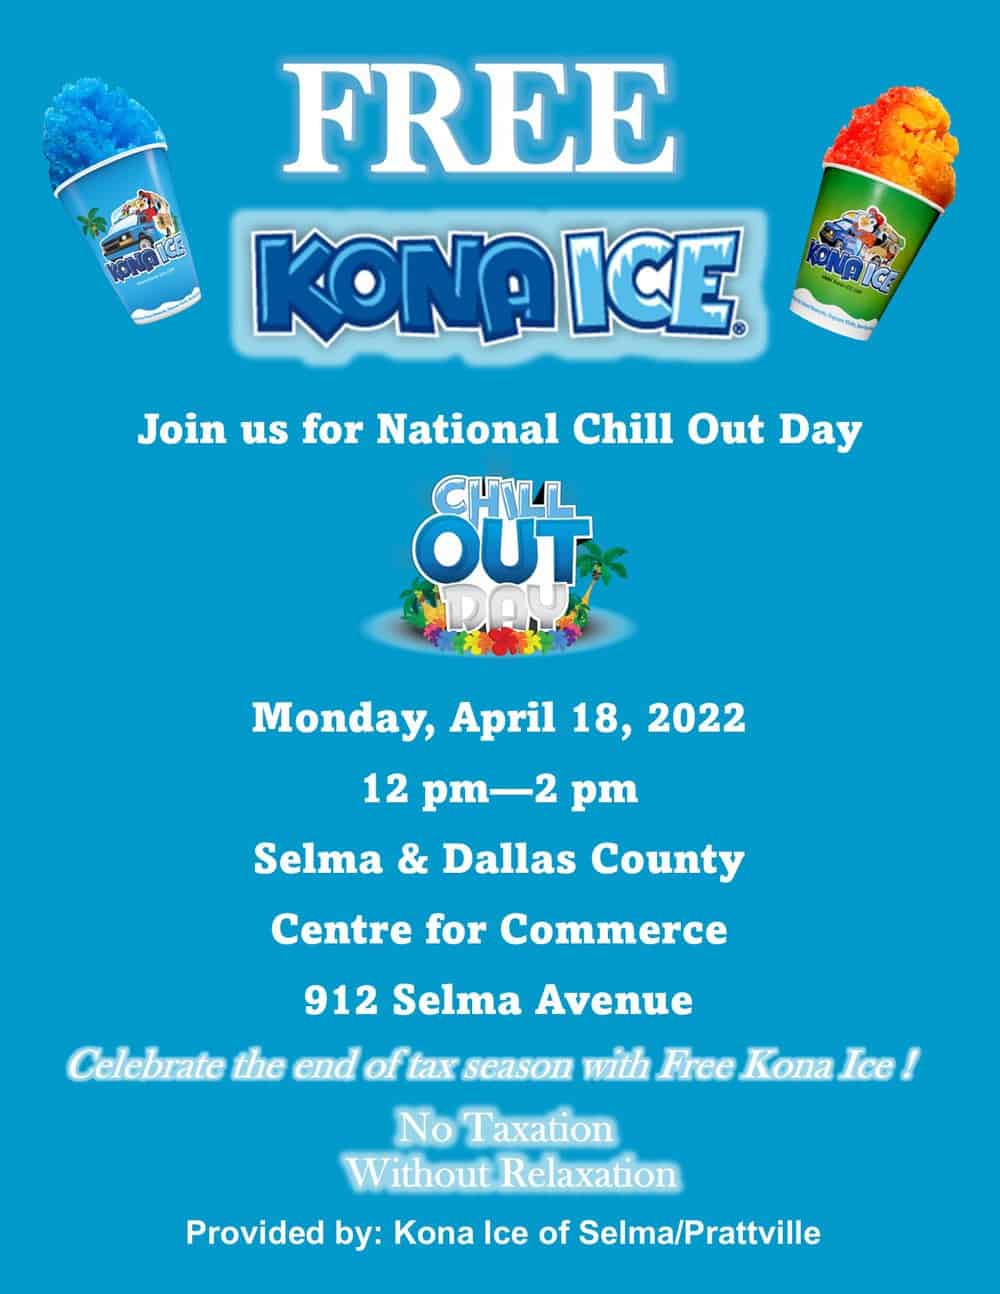 2022_Kona_Ice_Chill_Out_Day_Flyer.jpg